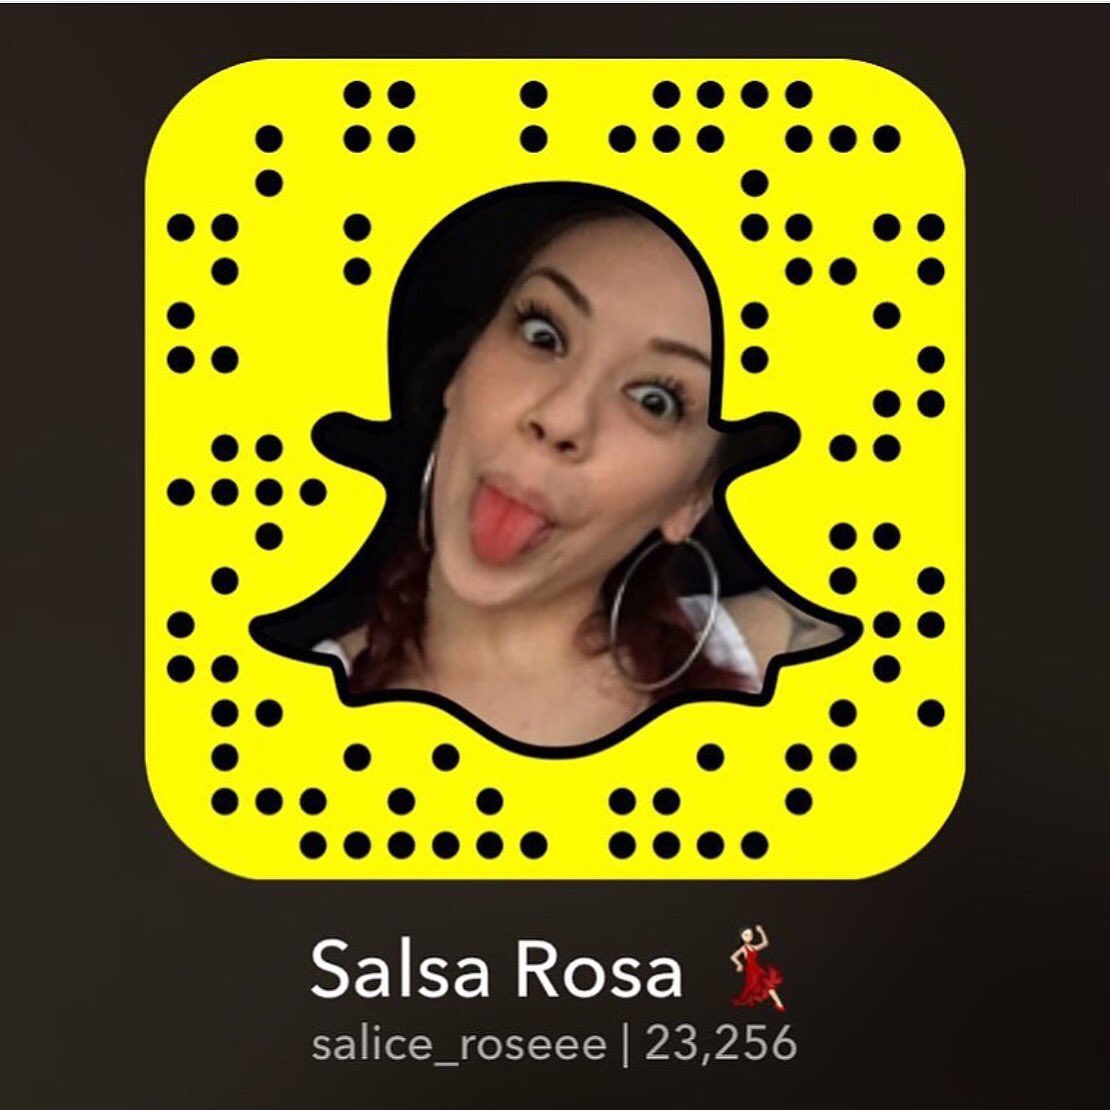 What is salice rose snapchat